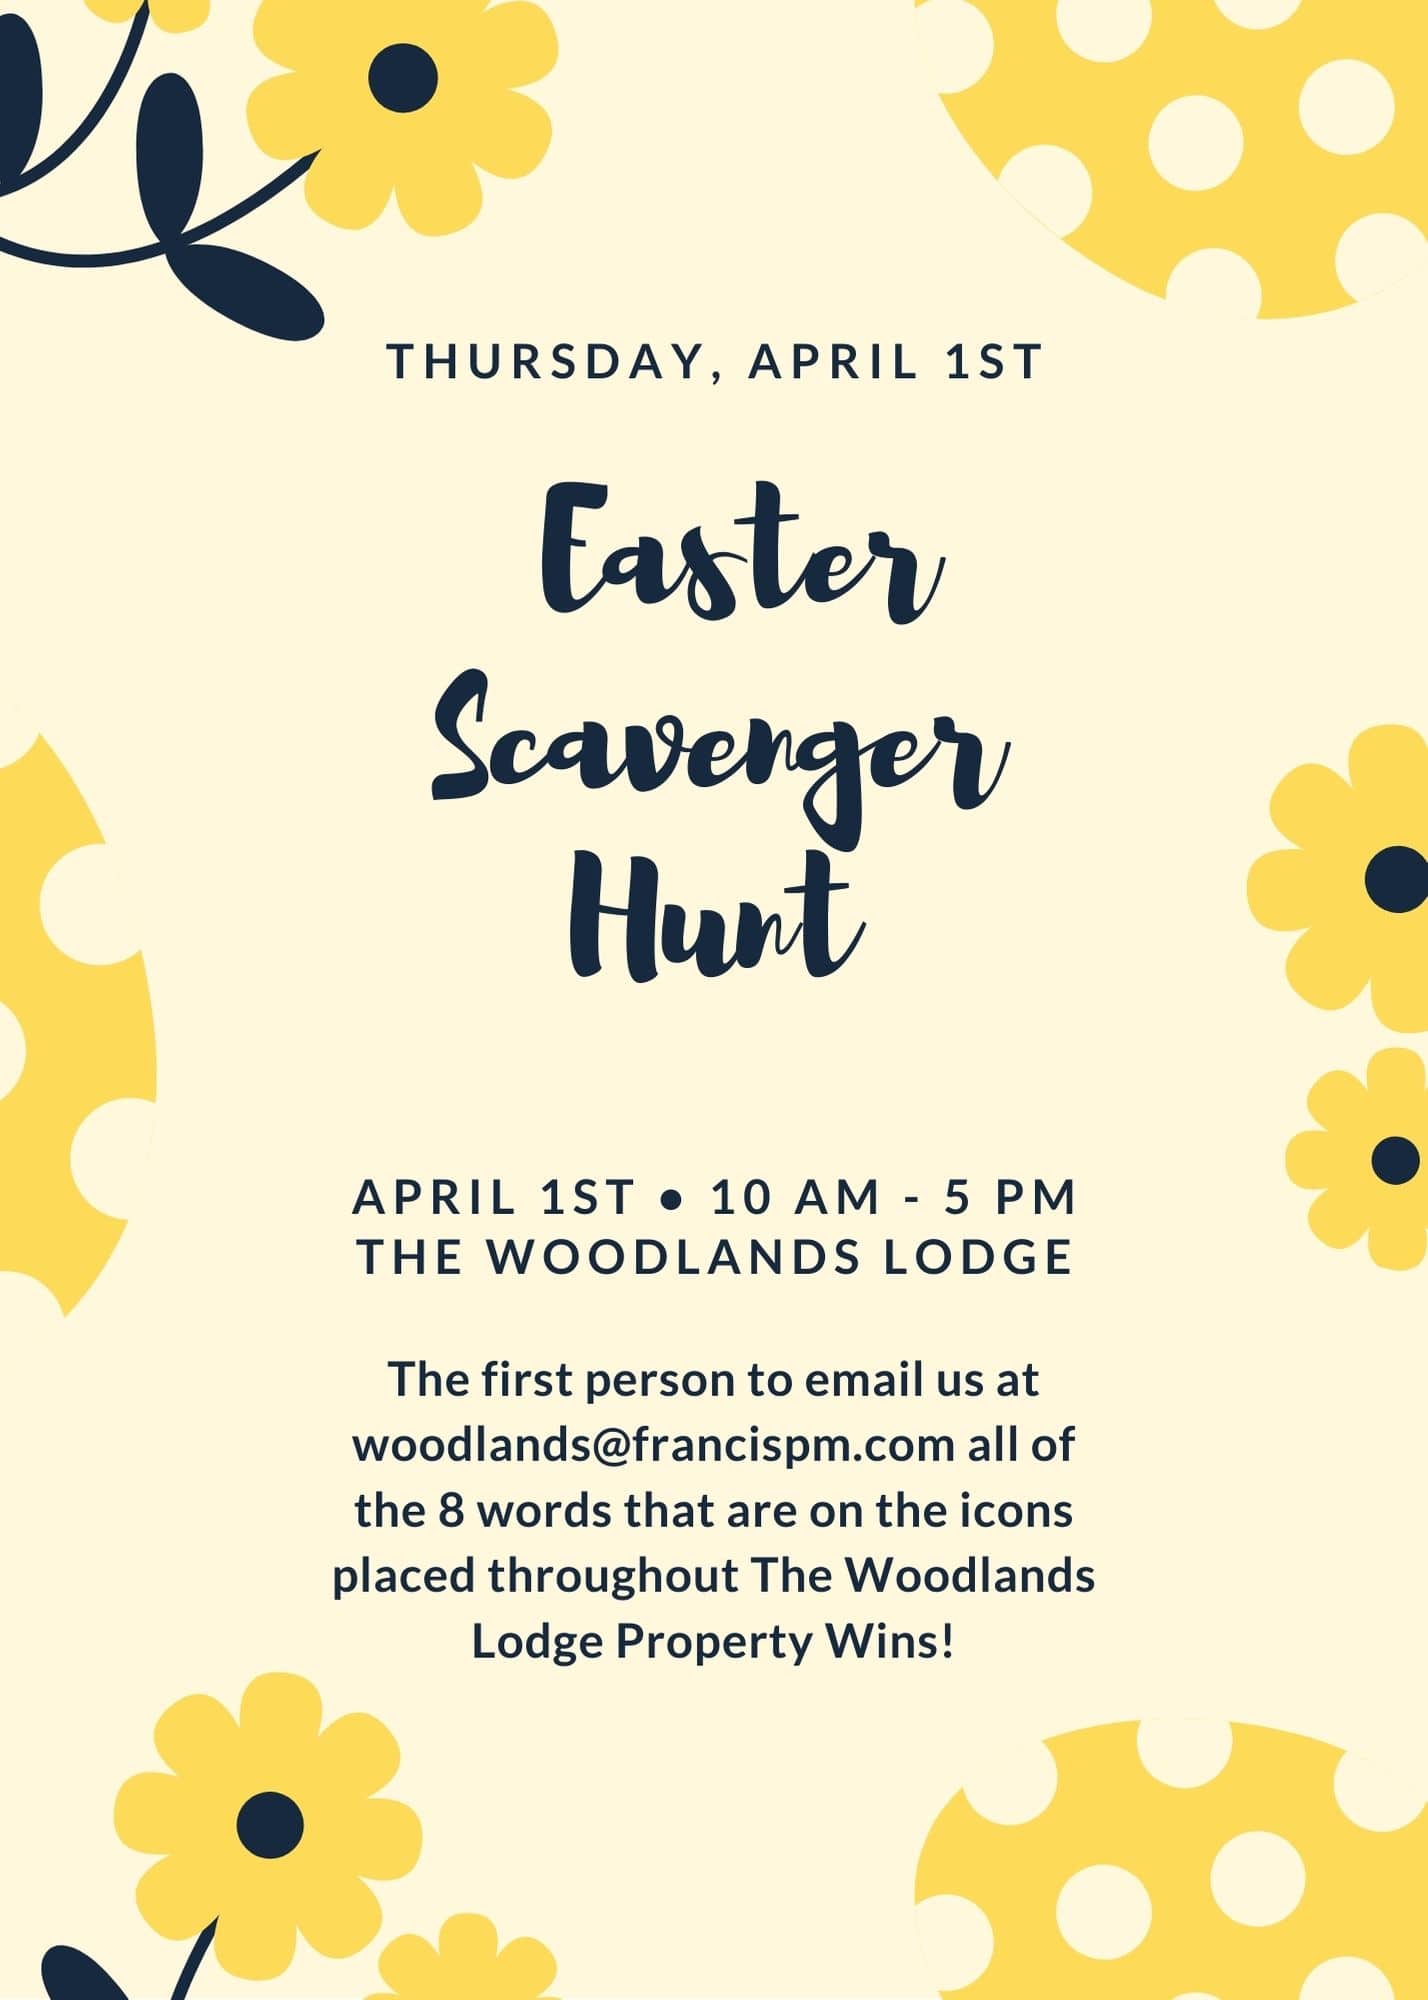 Easter scavenger hunt flyer for Apartments in The Woodlands TX.